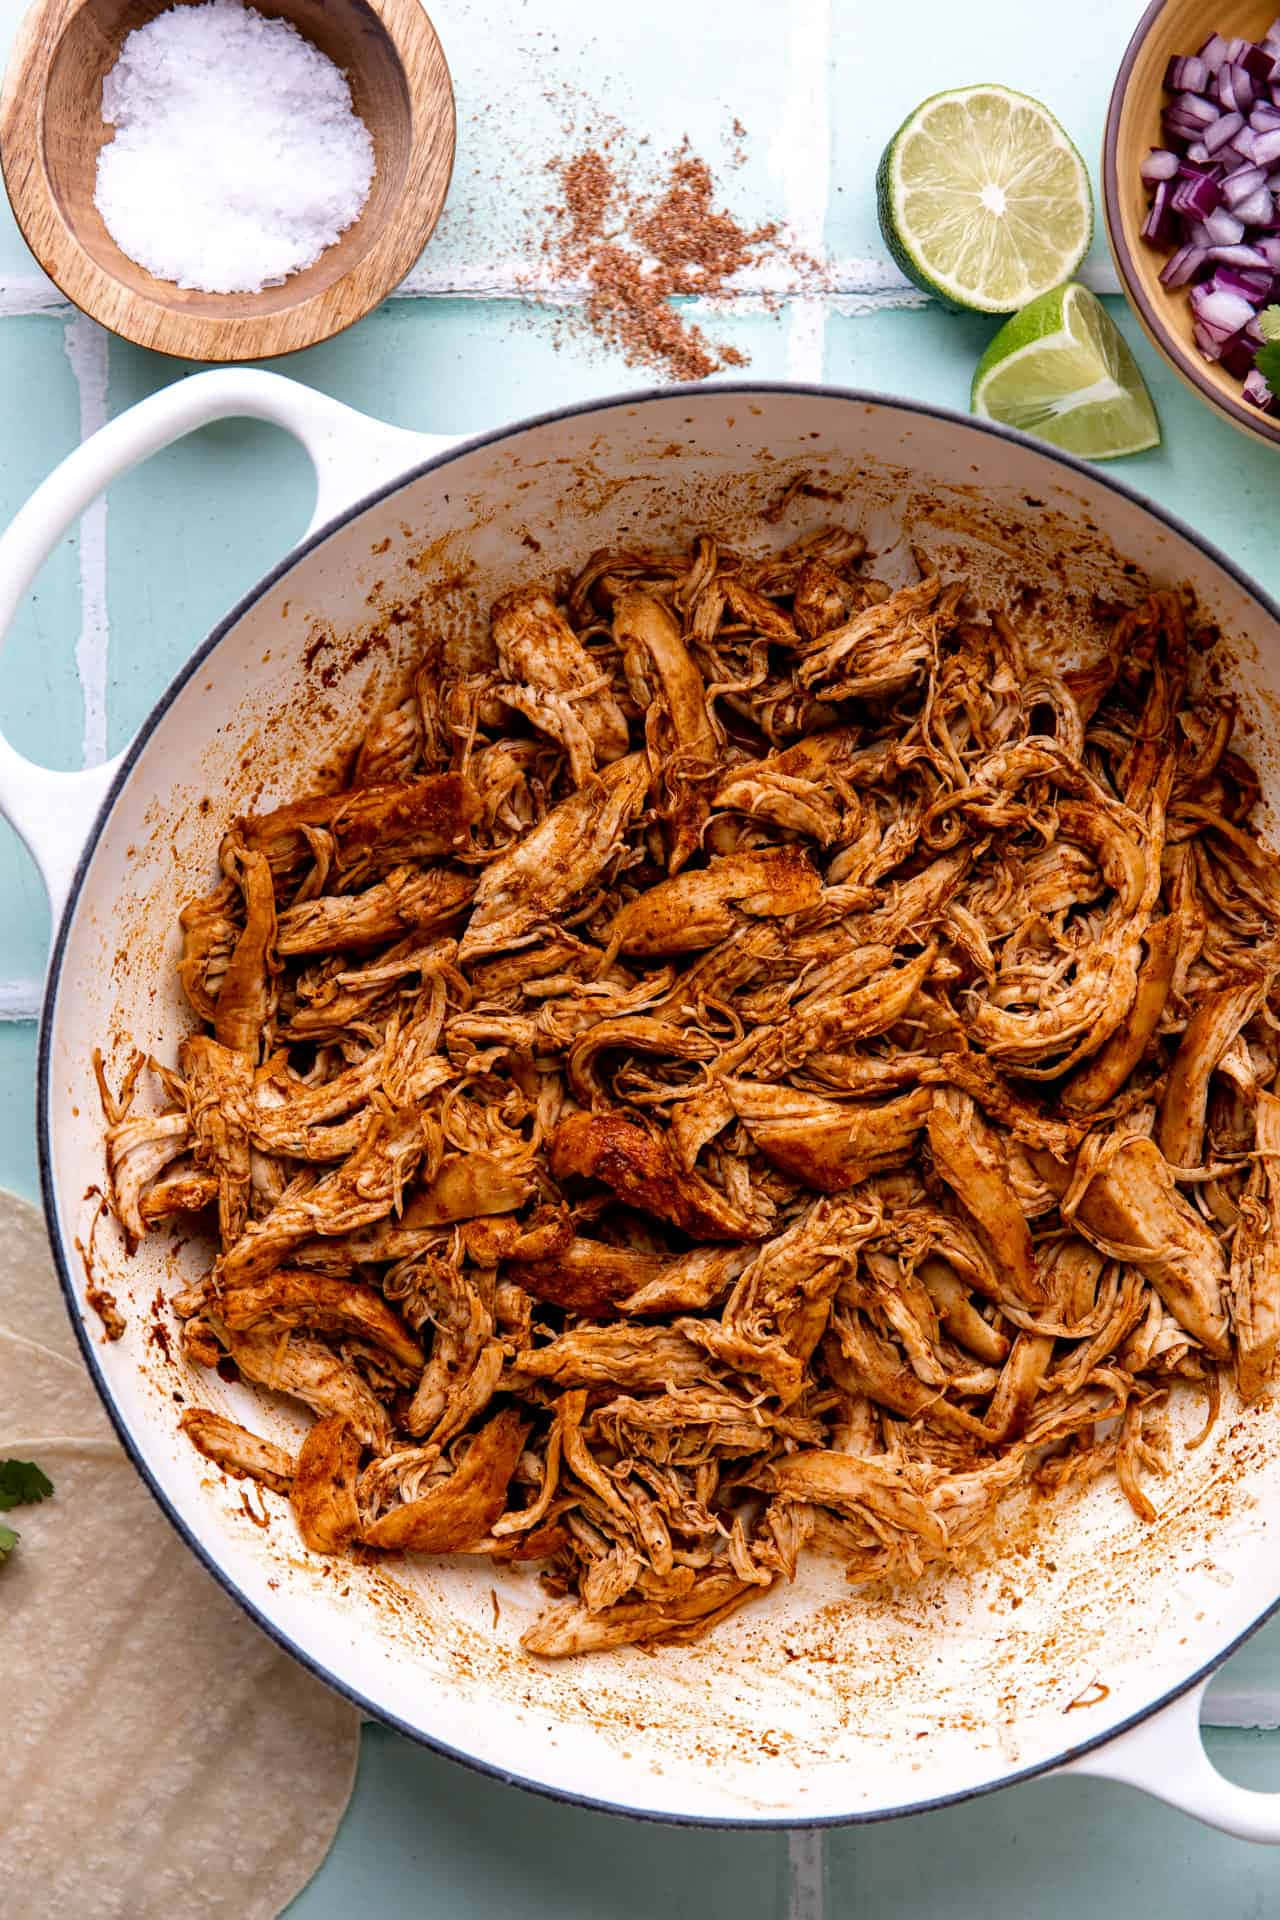 Shredded Chicken In A Pan With Spices And Limes